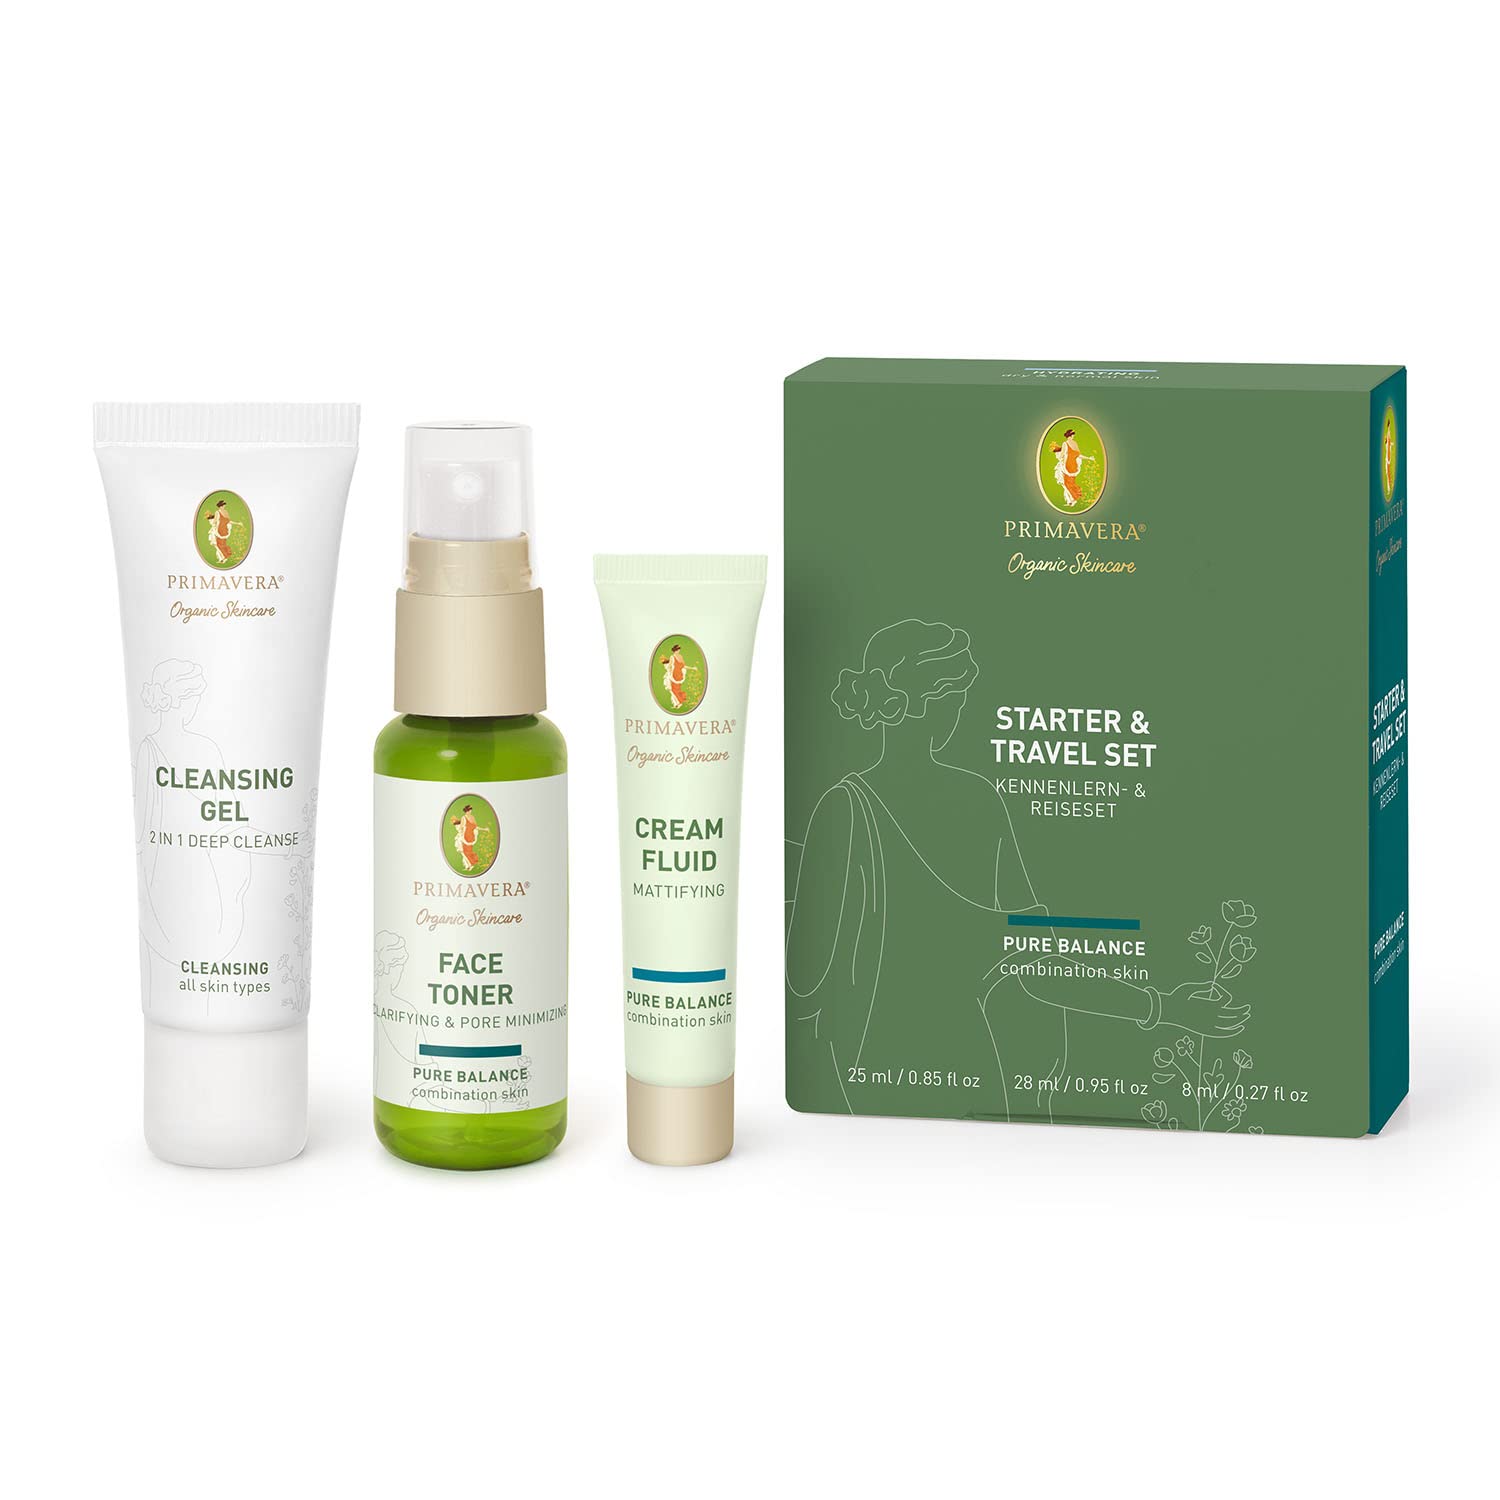 PRIMAVERA Starter & Travel Set Pure Balance - Natural Cosmetics - Learning to know & Travel Set for Combination Skin and Oily Skin - Gift Box Cleaning, Toner, Care - Vegan